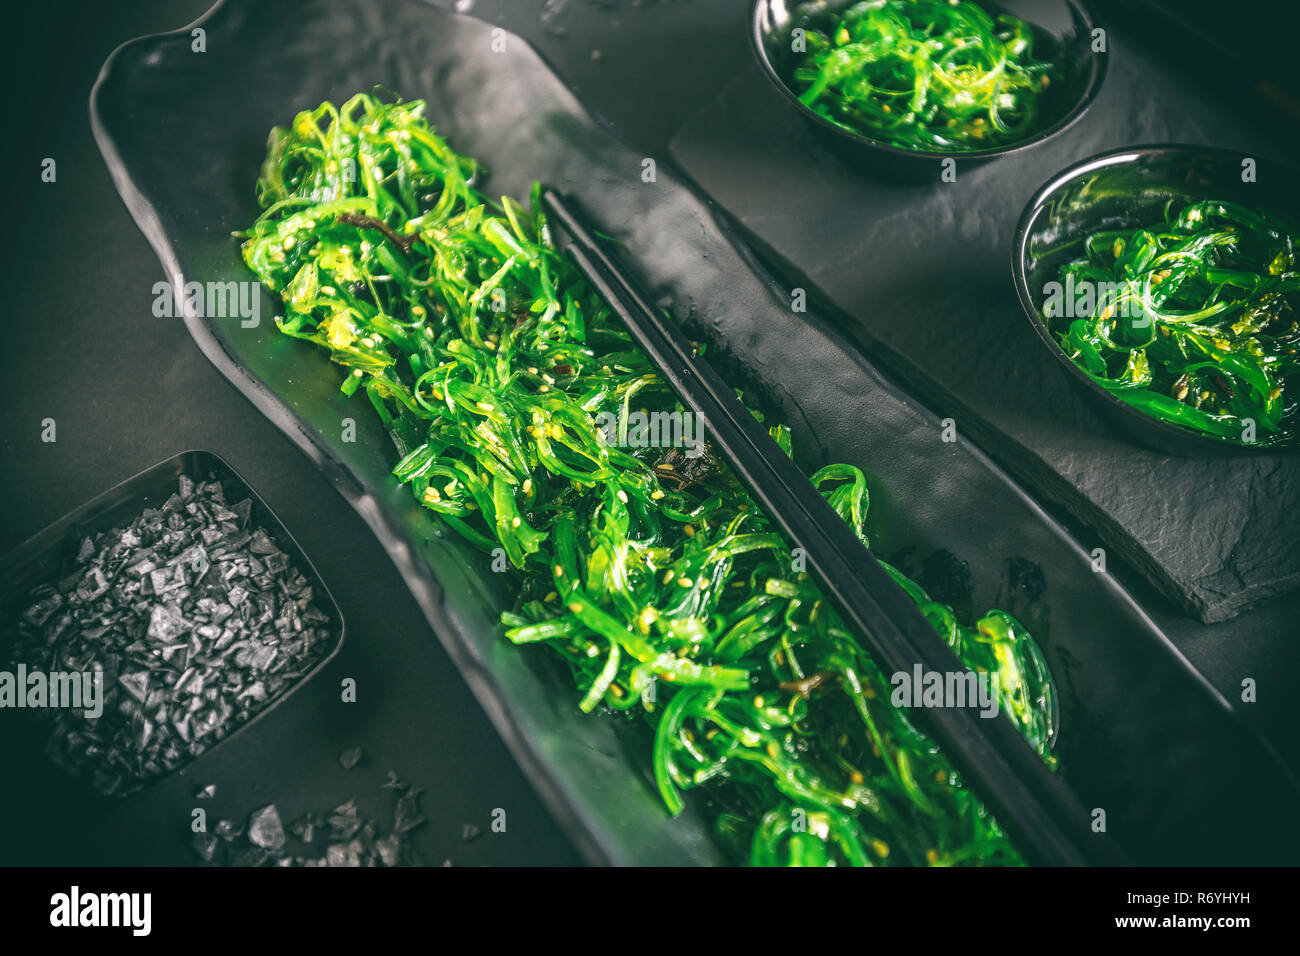 Pickled spicy seaweed Stock Photo